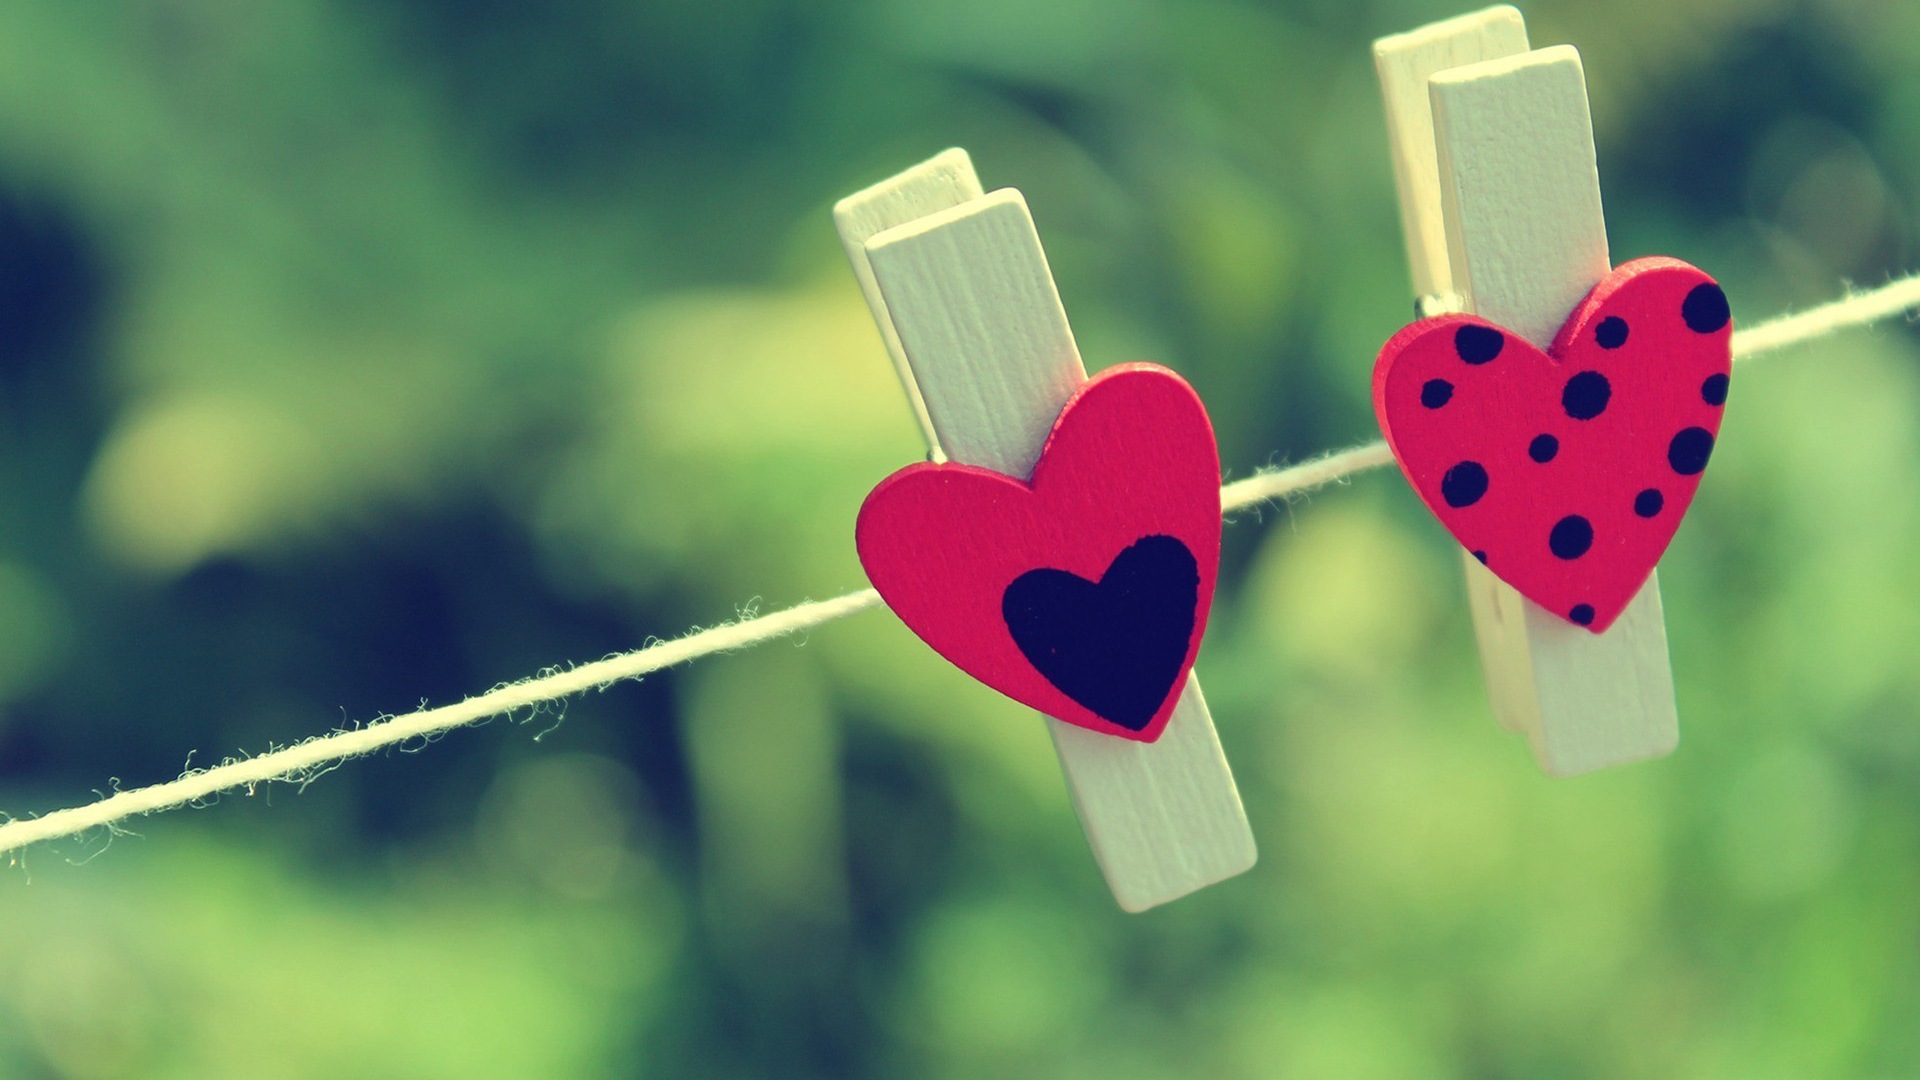 The theme of love, creative heart-shaped HD wallpapers #18 - 1920x1080